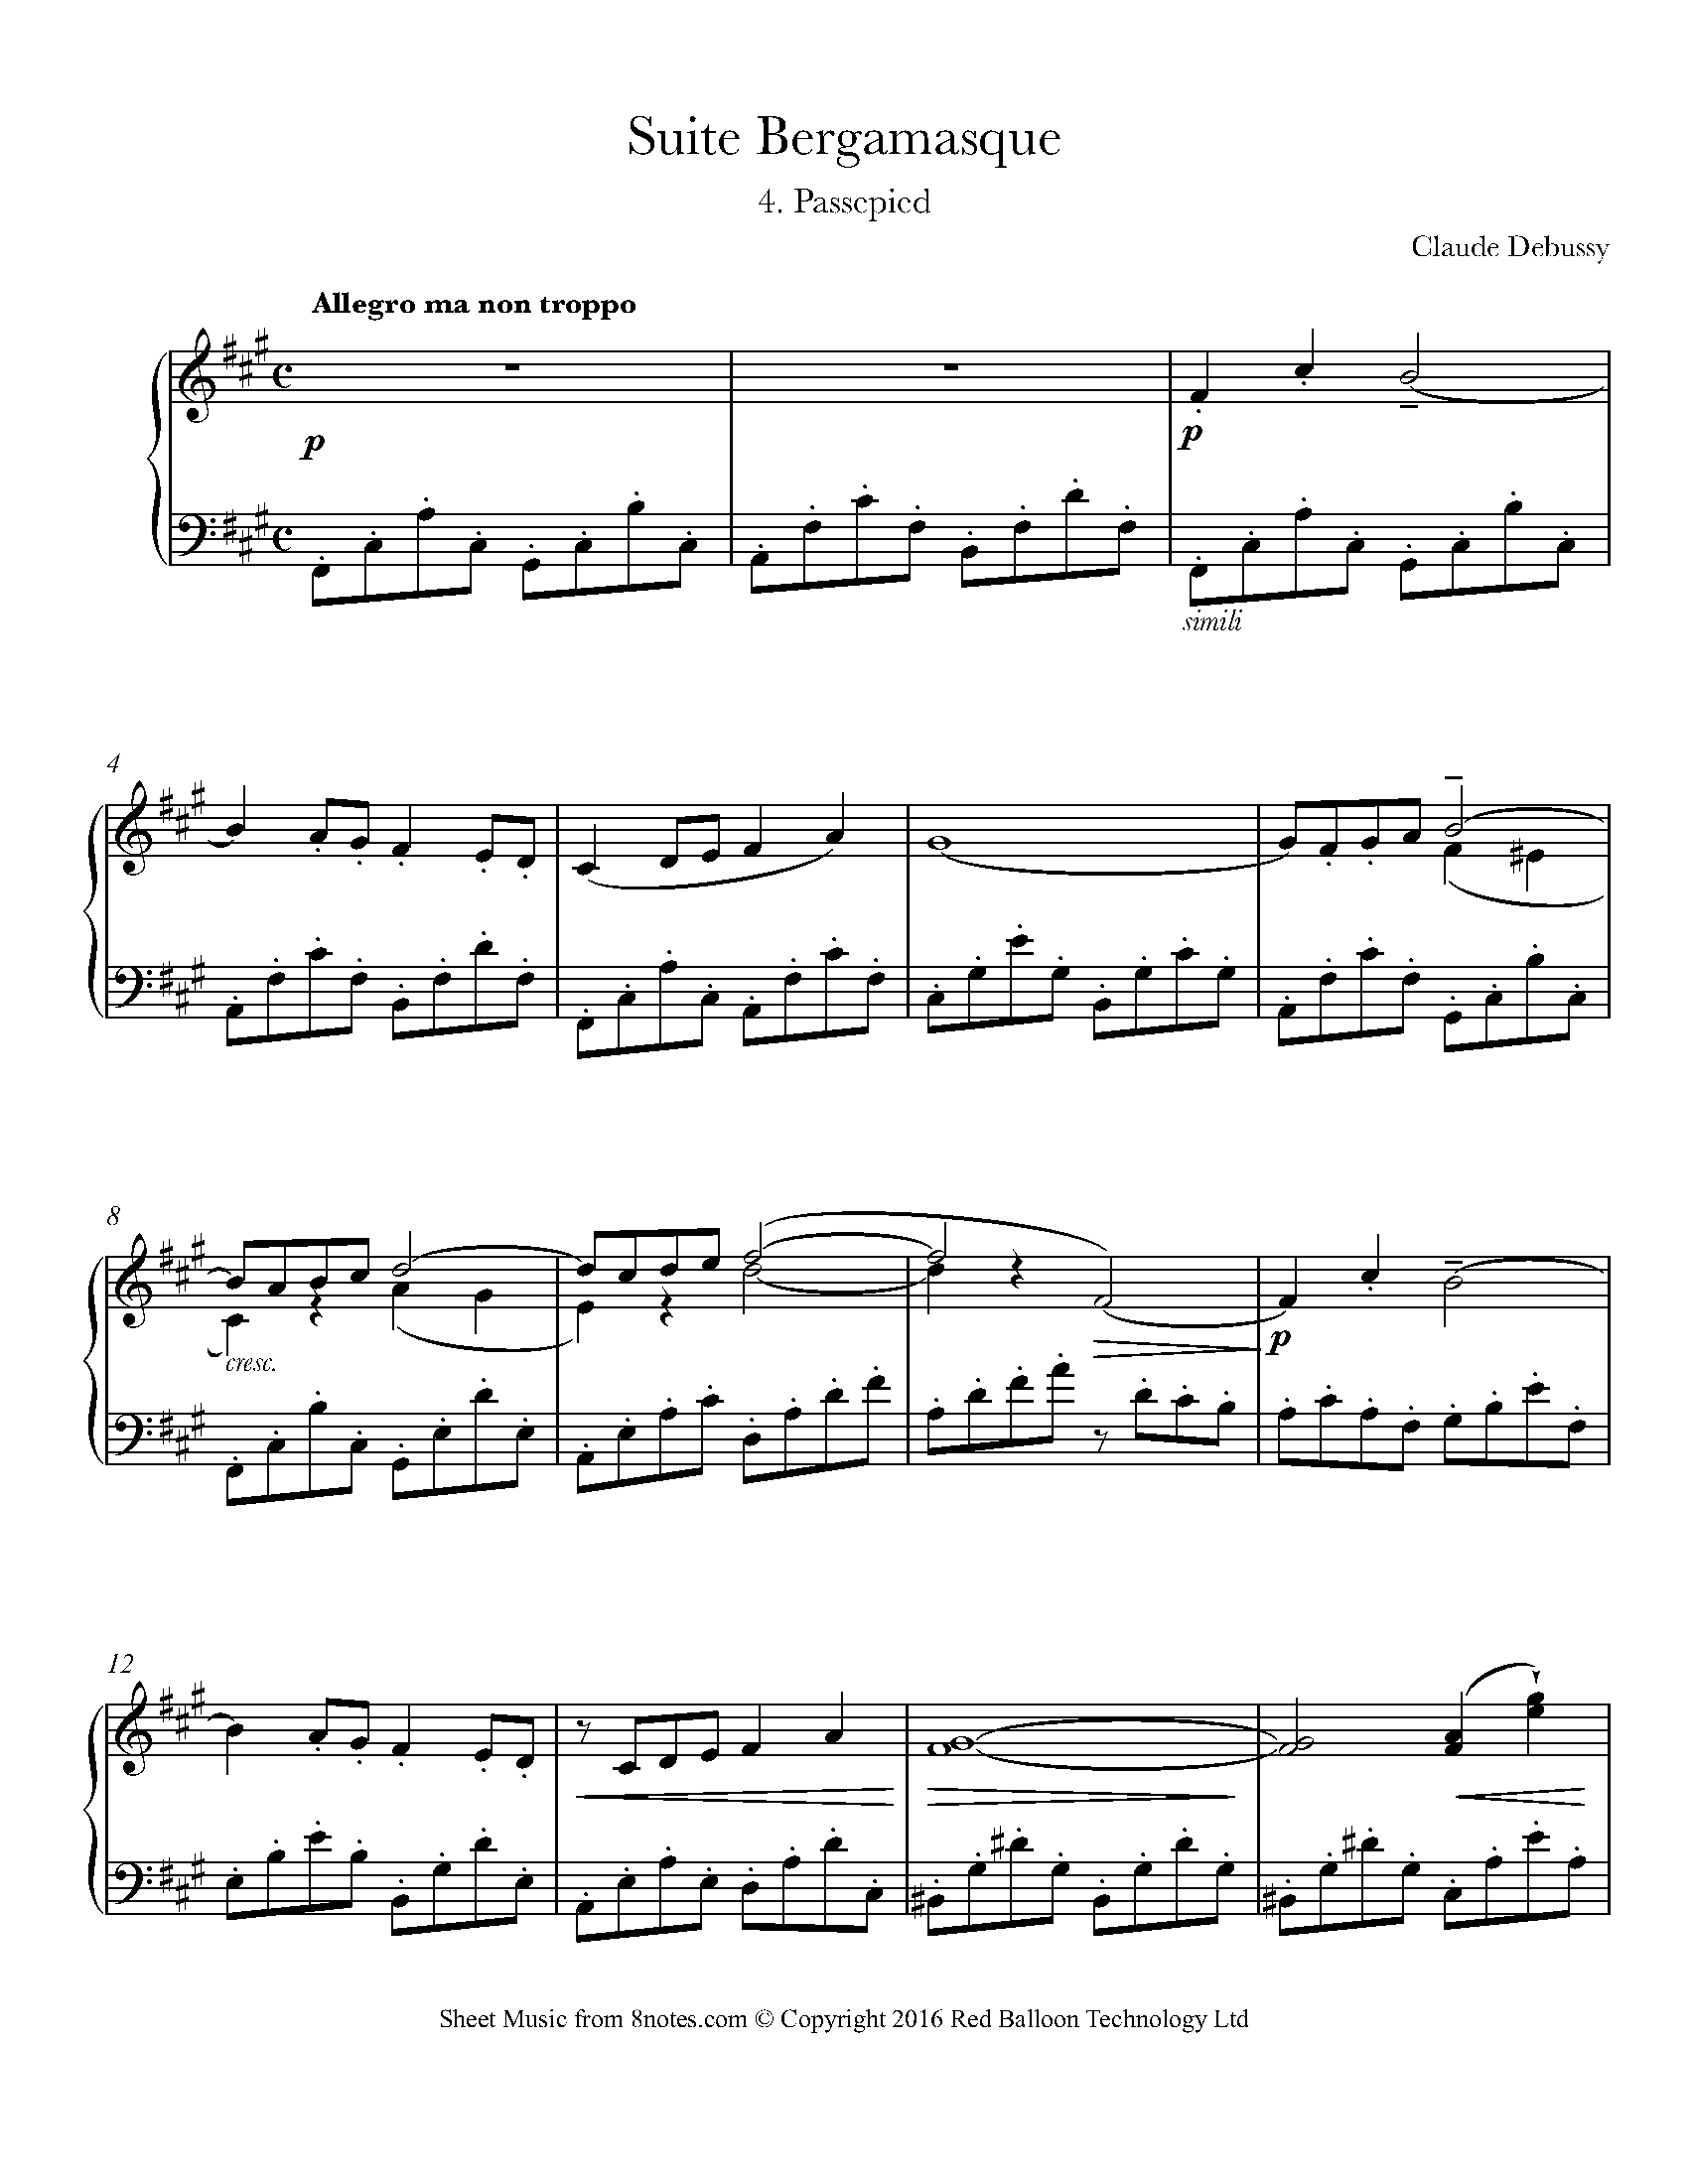 Debussy - Suite Bergamasque 4. Passepied Sheet music for Piano - 8notes.com